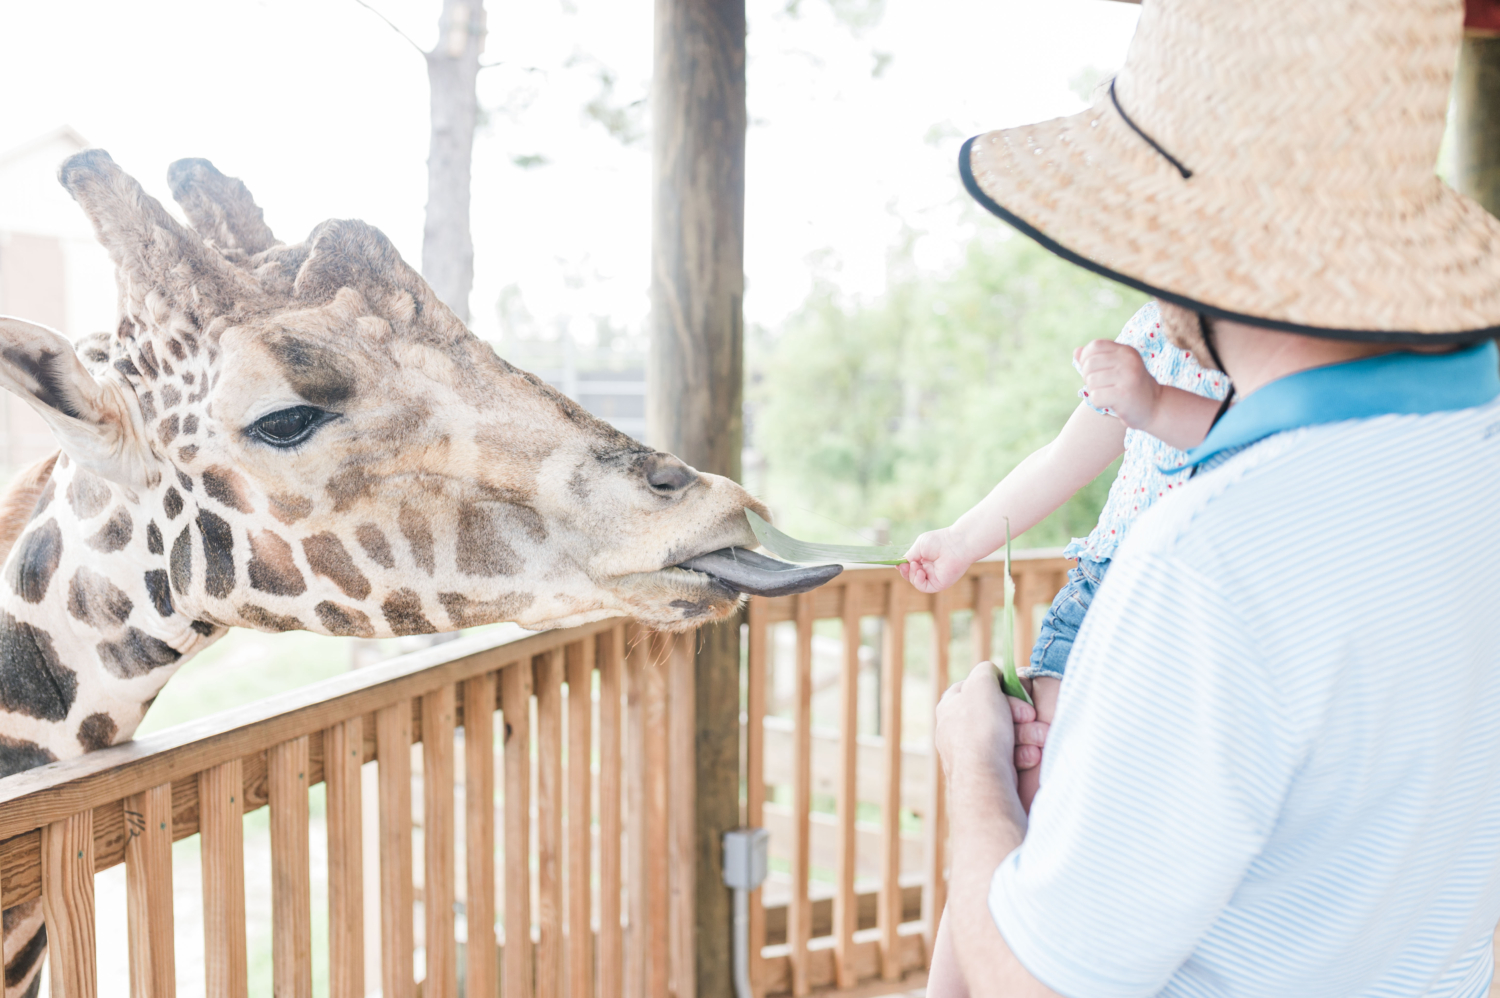 John Naylor holding daughter who is holding out a leaf for a giraffe to eat at the Alabama Gulf Coast Zoo.